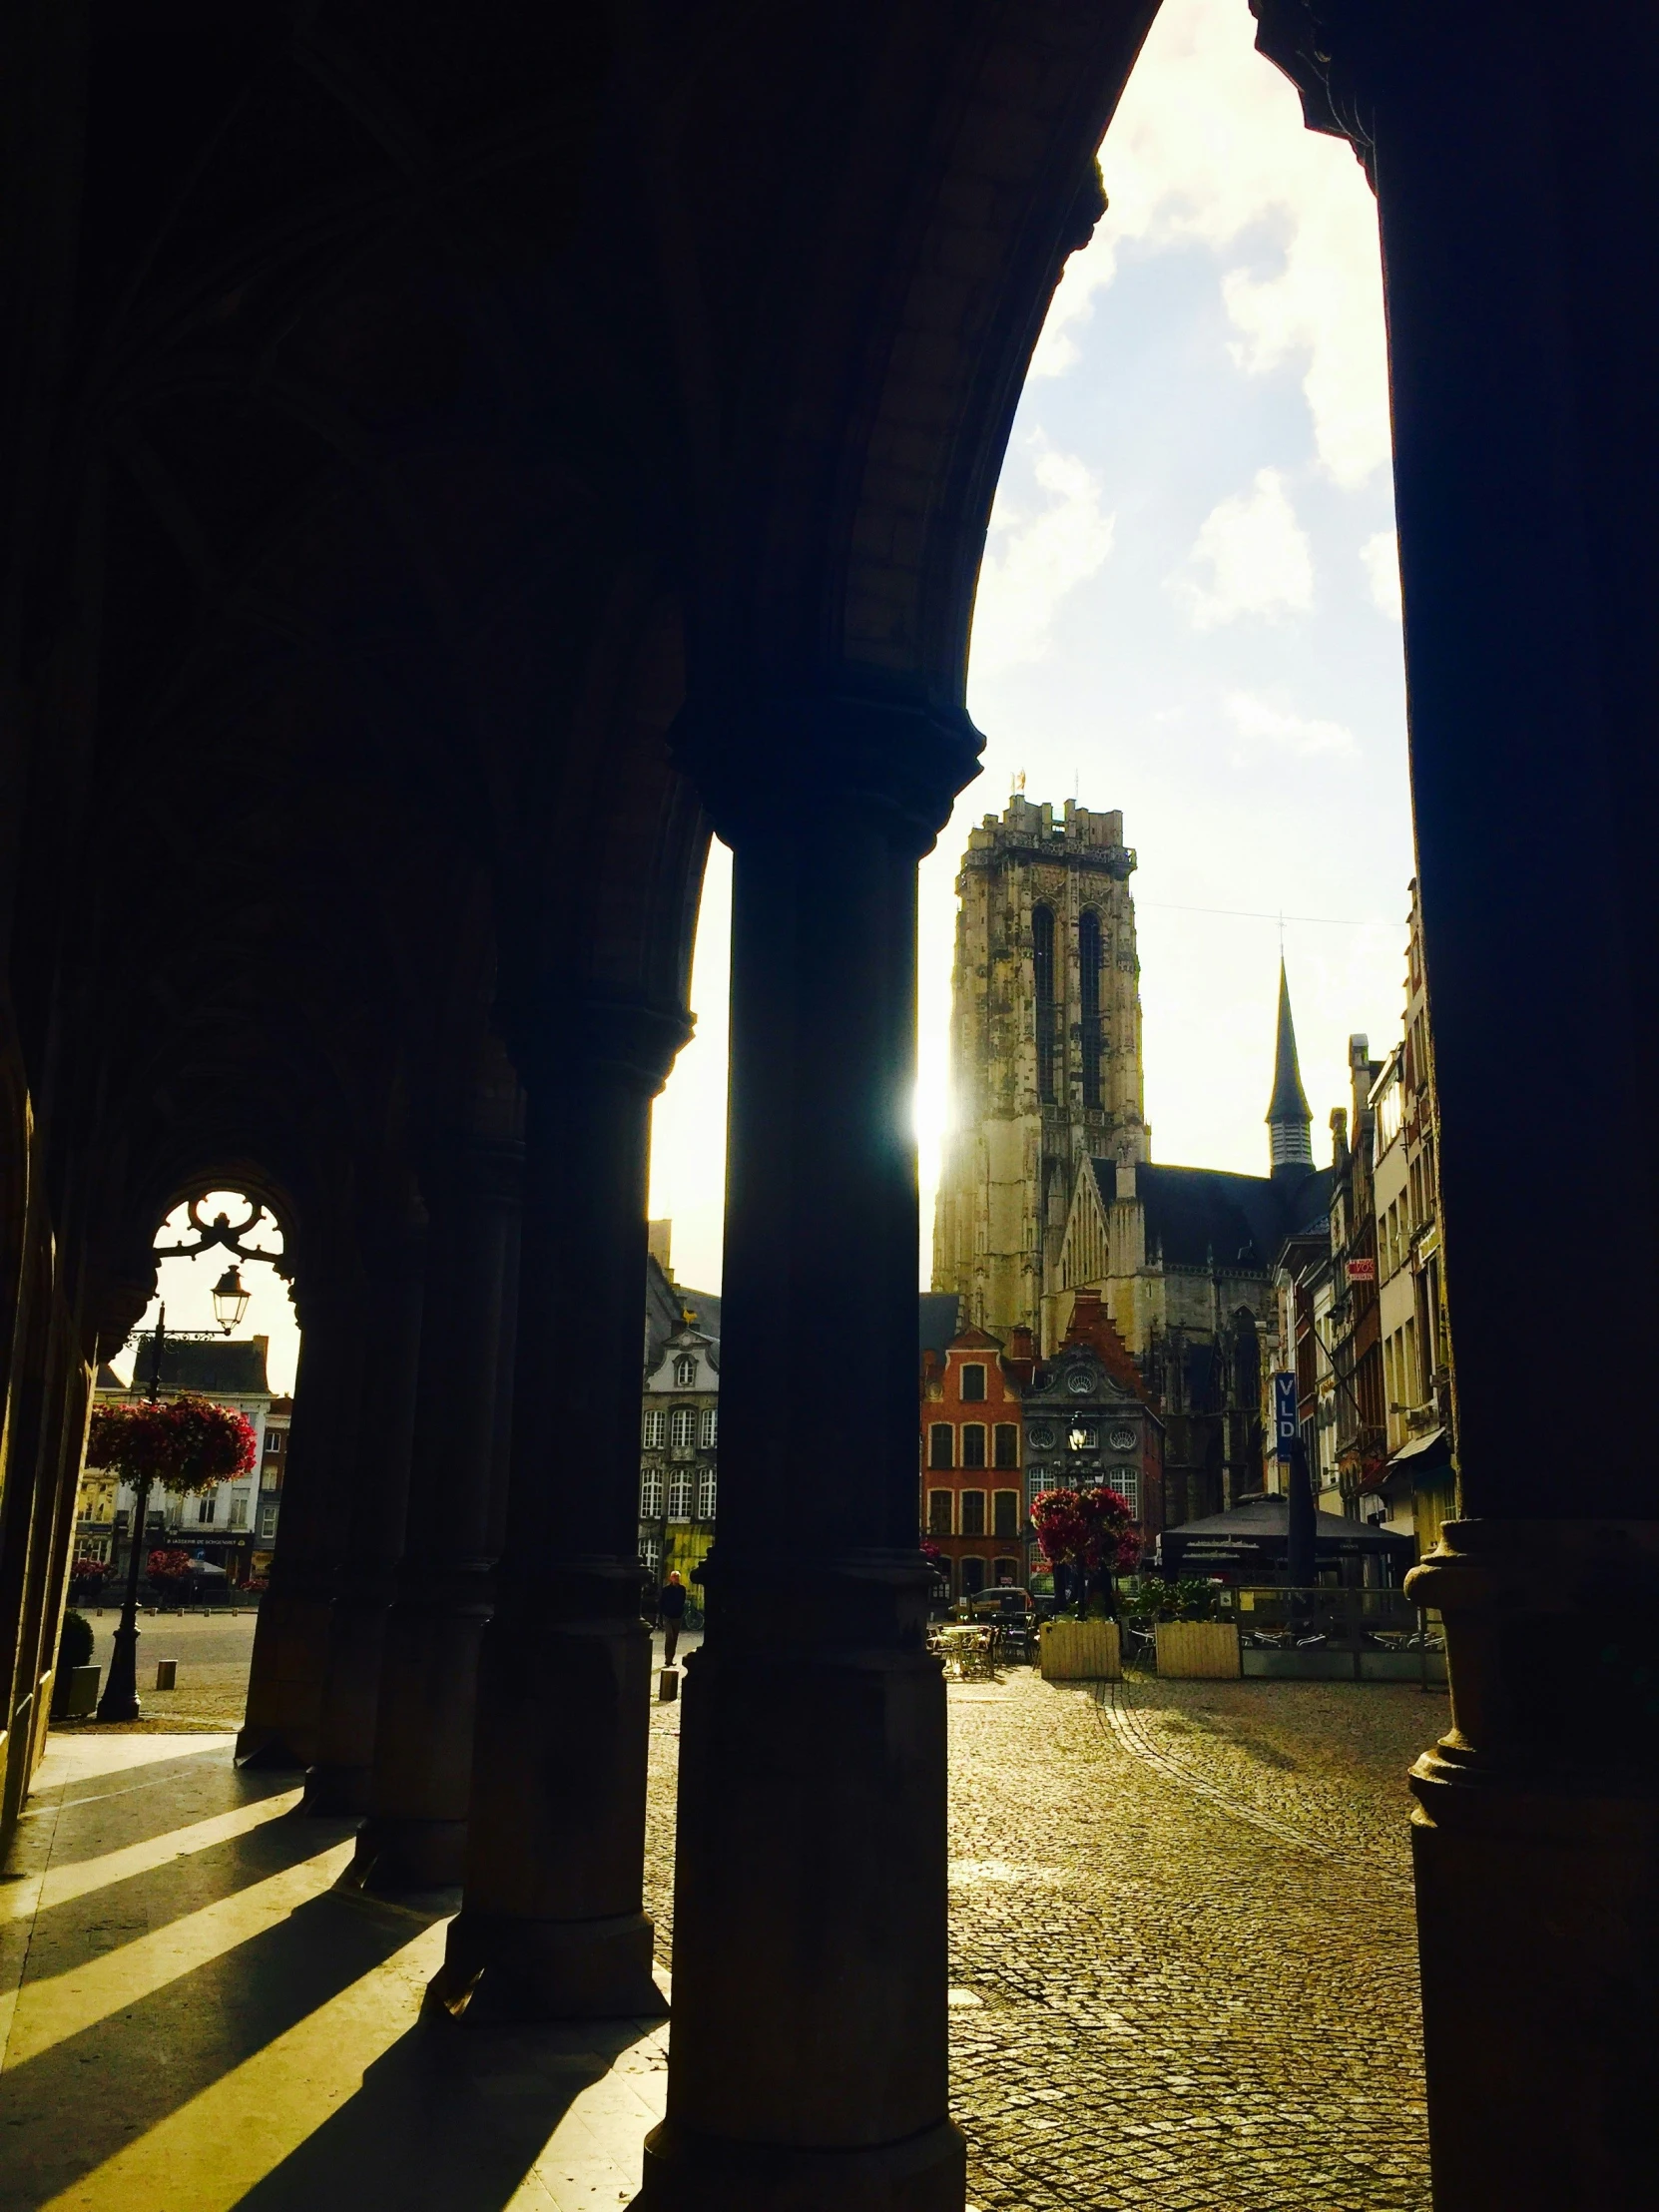 a street scene with a cathedral and sun coming through